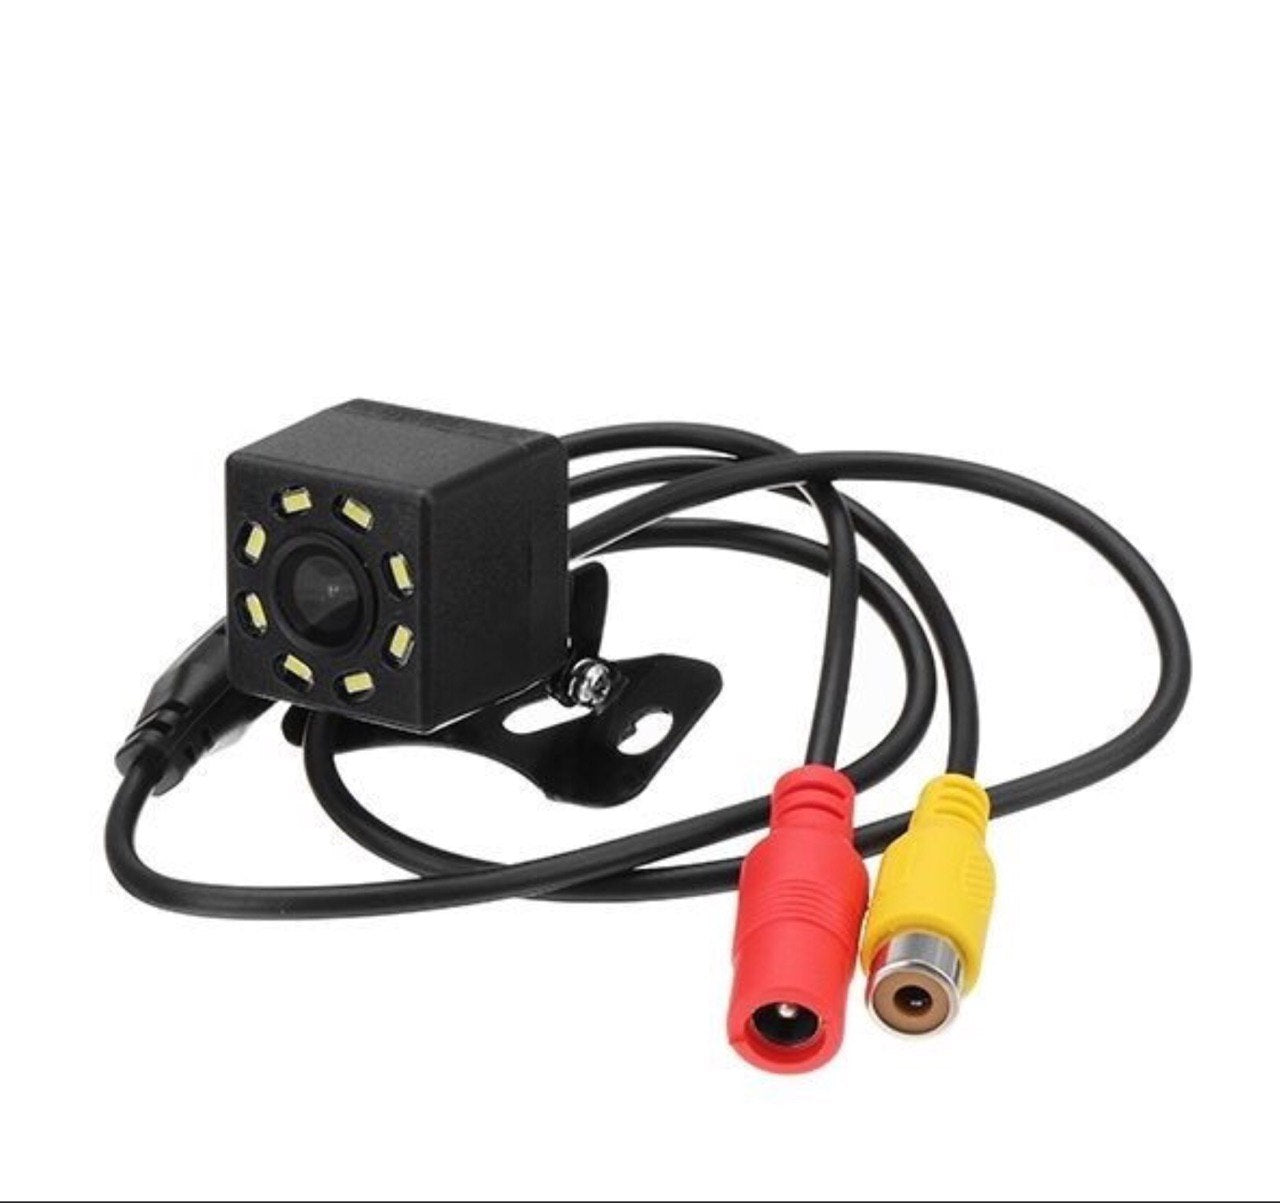 Car Rear View Camera 8 LED Night Vision Reversing Auto Parking for Car Stereo Monitor CCD HD Video